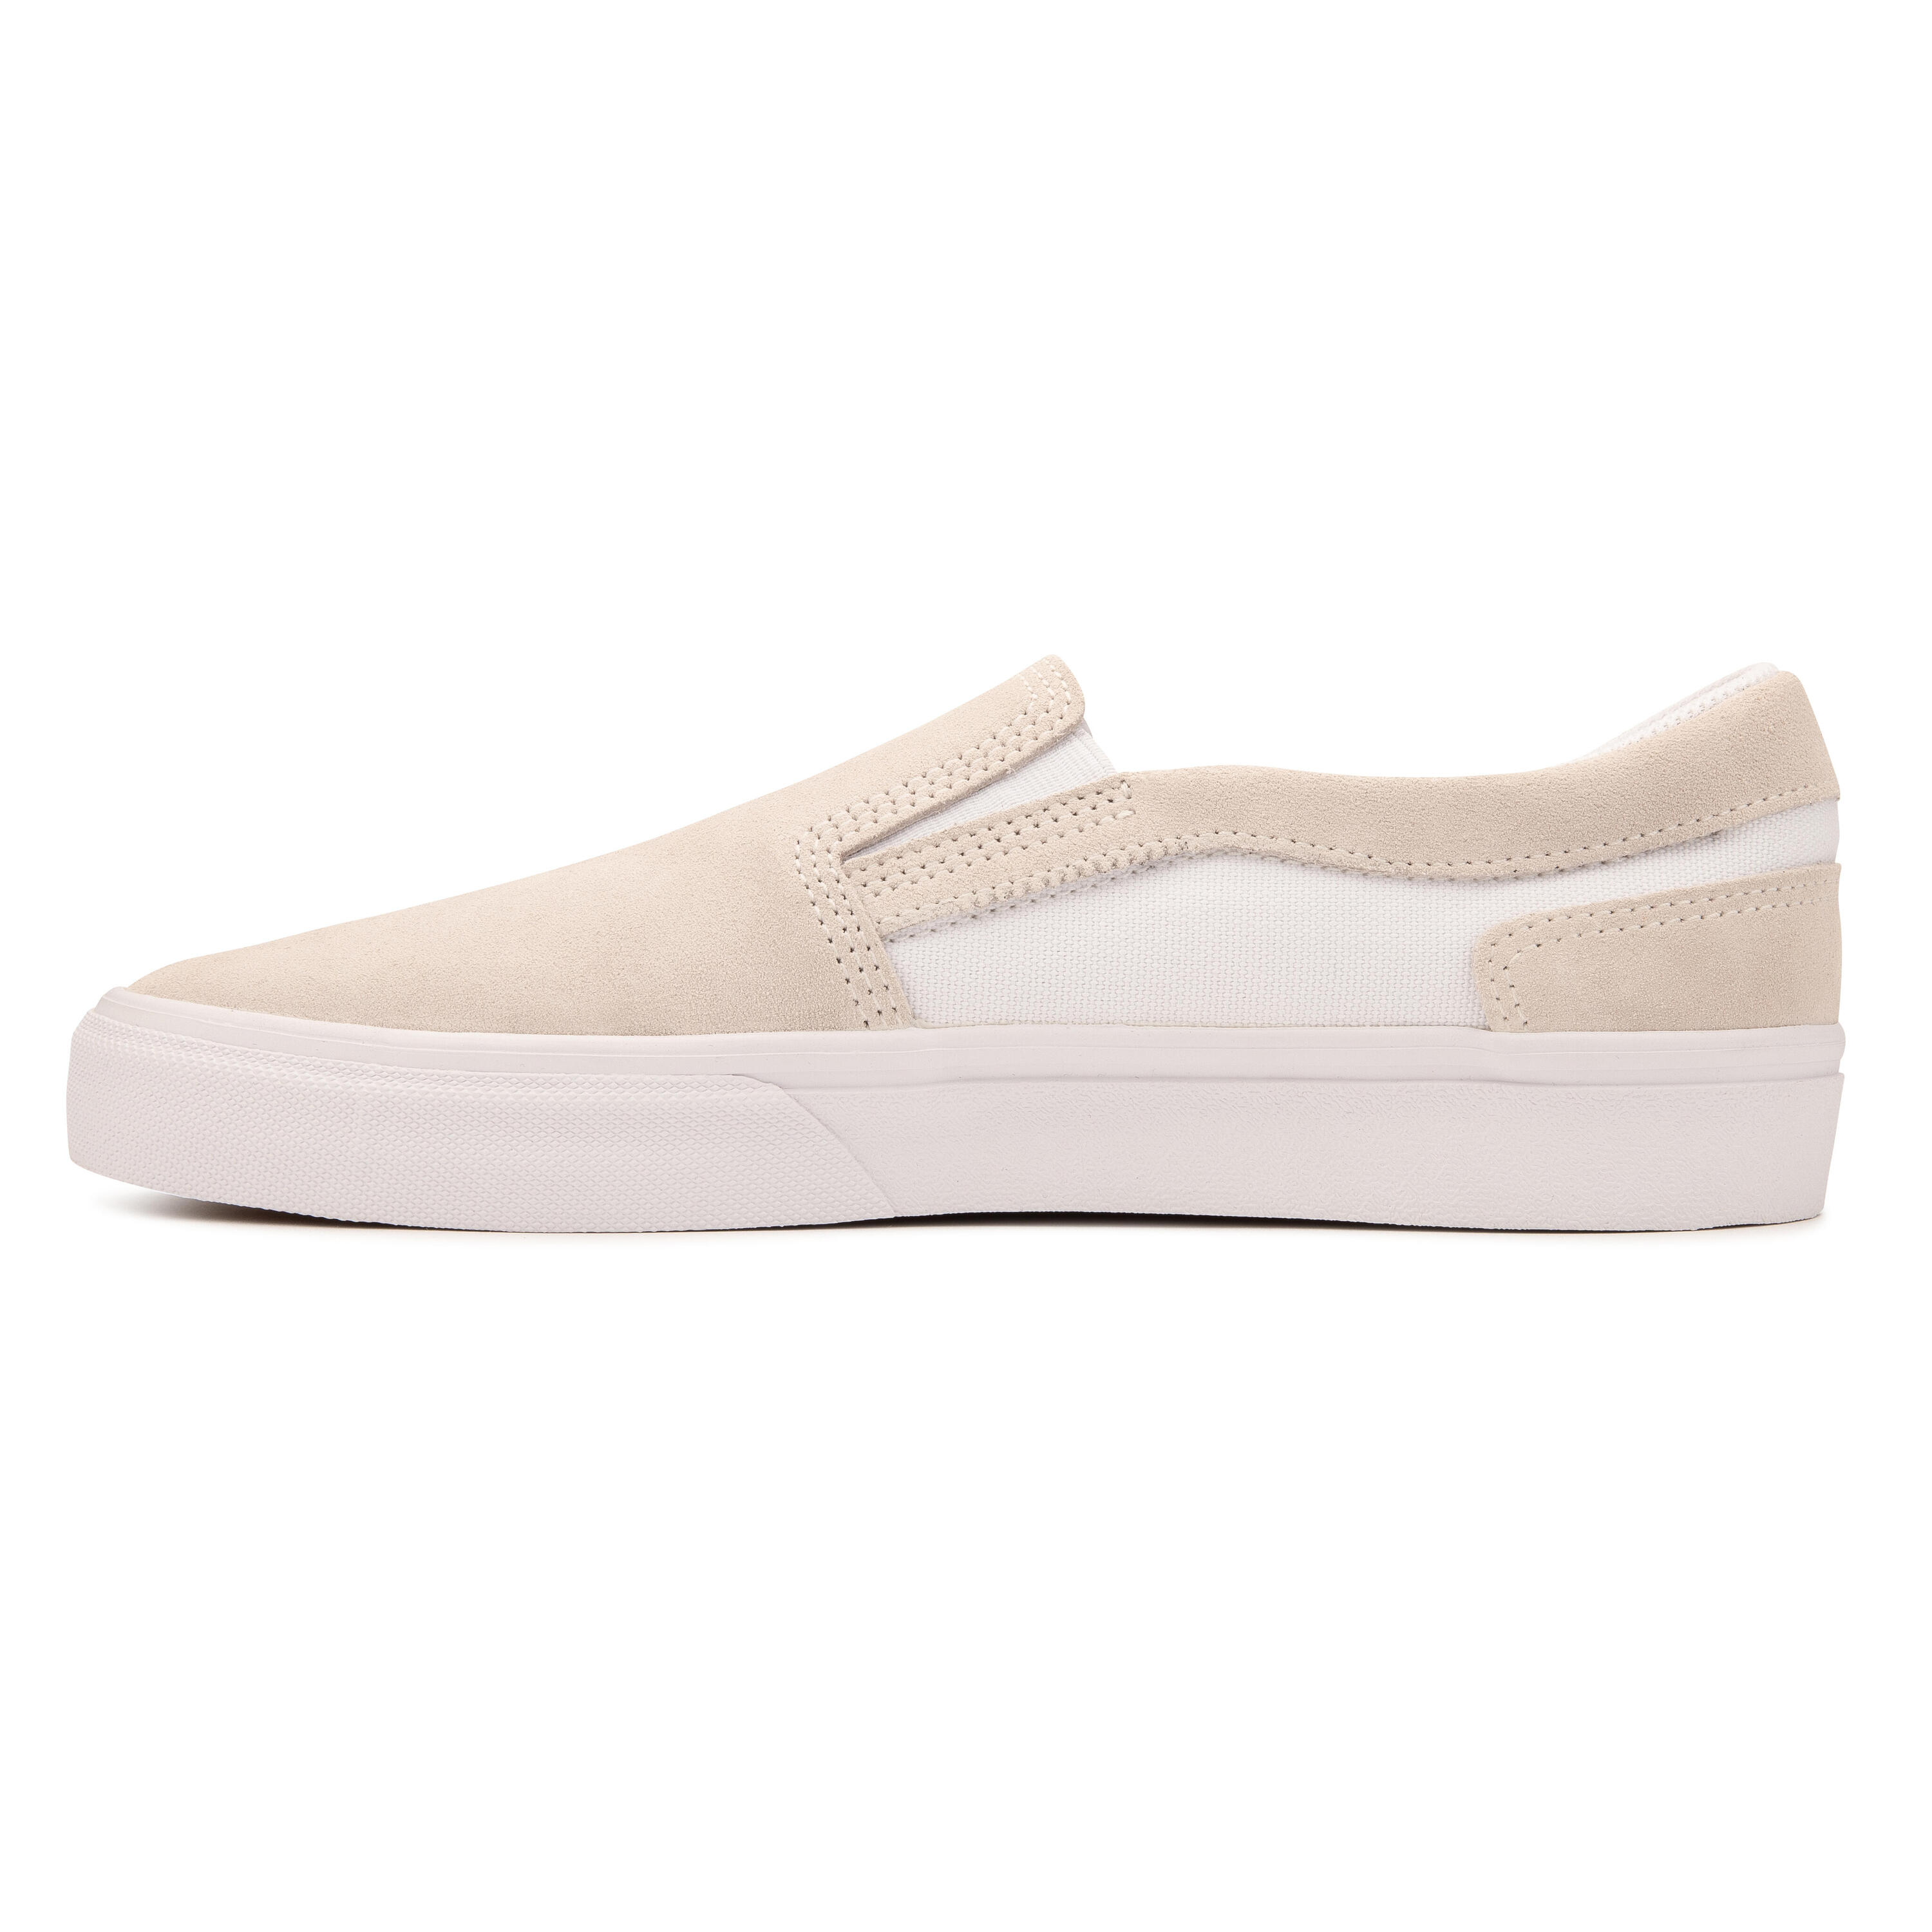 Adult Low-Top Slip-On Skate Shoes Without Laces Vulca 500 - White 6/13